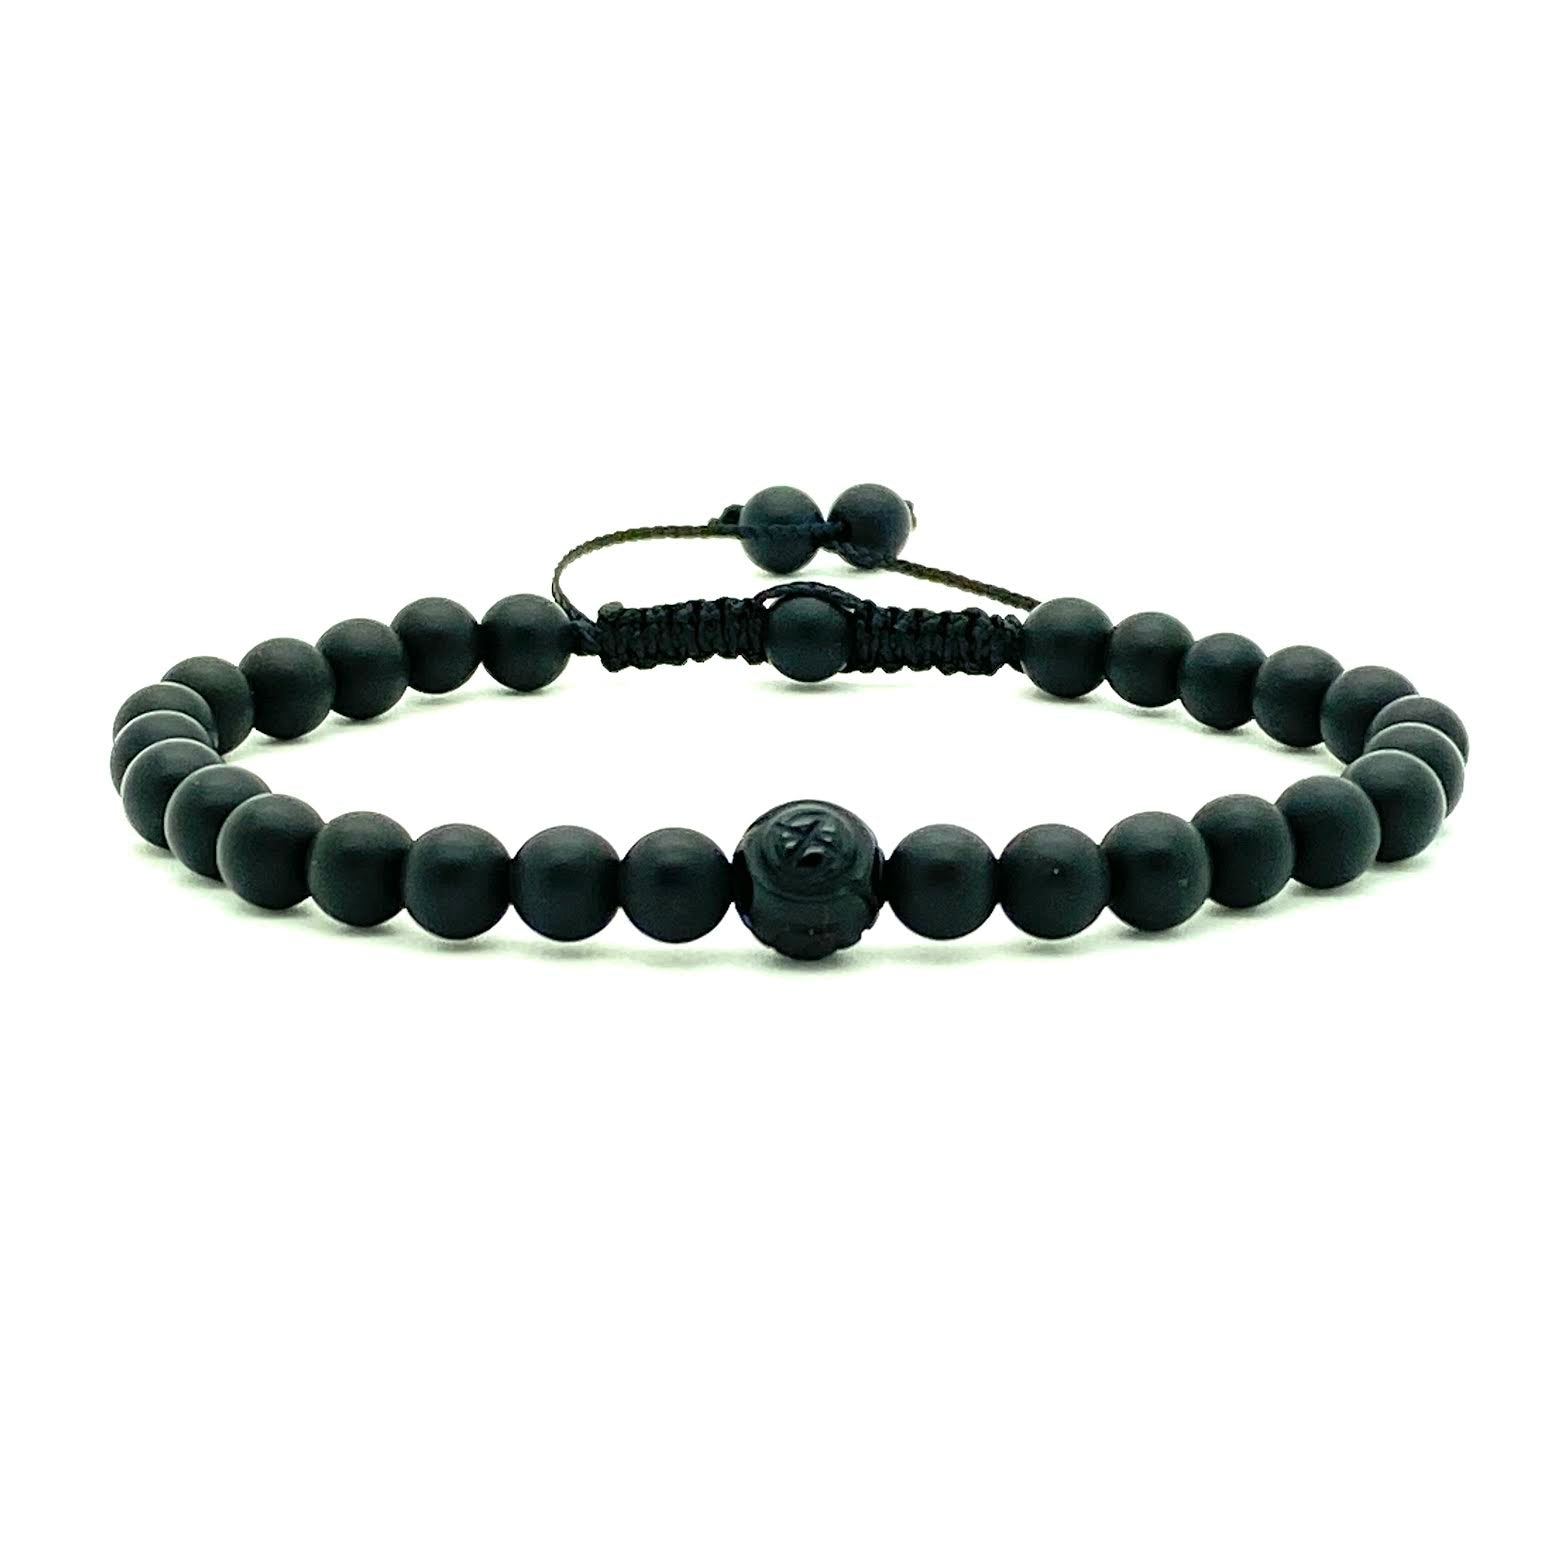 This popular matte onyx beaded bracelet is accented with a single carved black onyx dragon bead for a cool, confident look. Hand knotted adjustable cord for a perfect fit. Made by WristBend